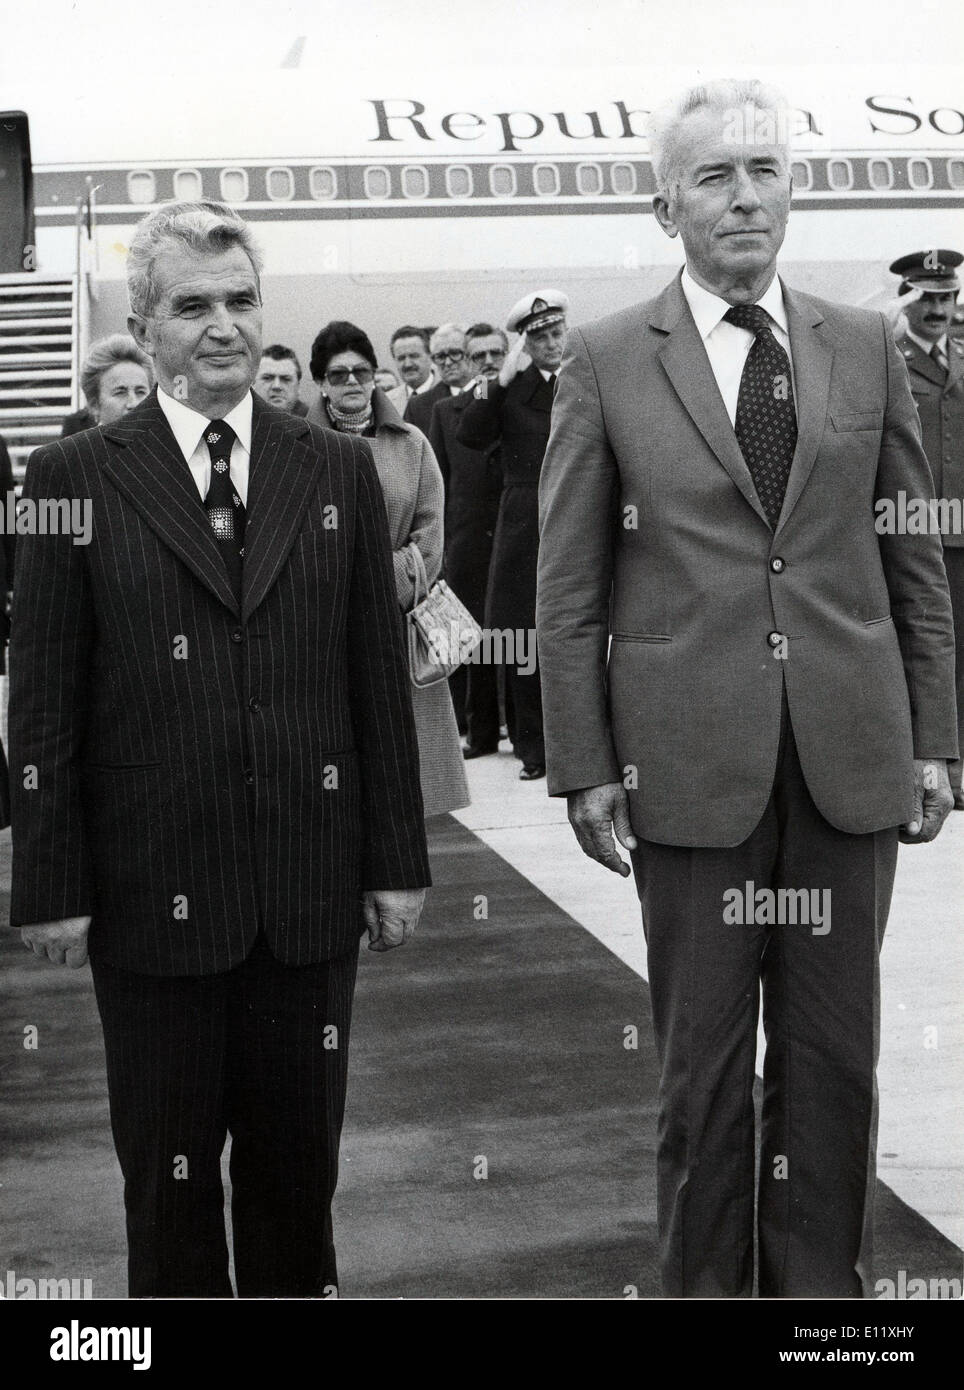 Nov 03, 1980 - Belgrade, Yugoslavia - Romanian Secretary General NIKOLAE CEAUSESCU (L) is greeted at the Belgrade Airport by President of the Socialist Federal Republic of Yugoslavia CVIJETIN MIJATOVIC. Ceausescu is on an official and friendly visit to Yugoslavia. Stock Photo